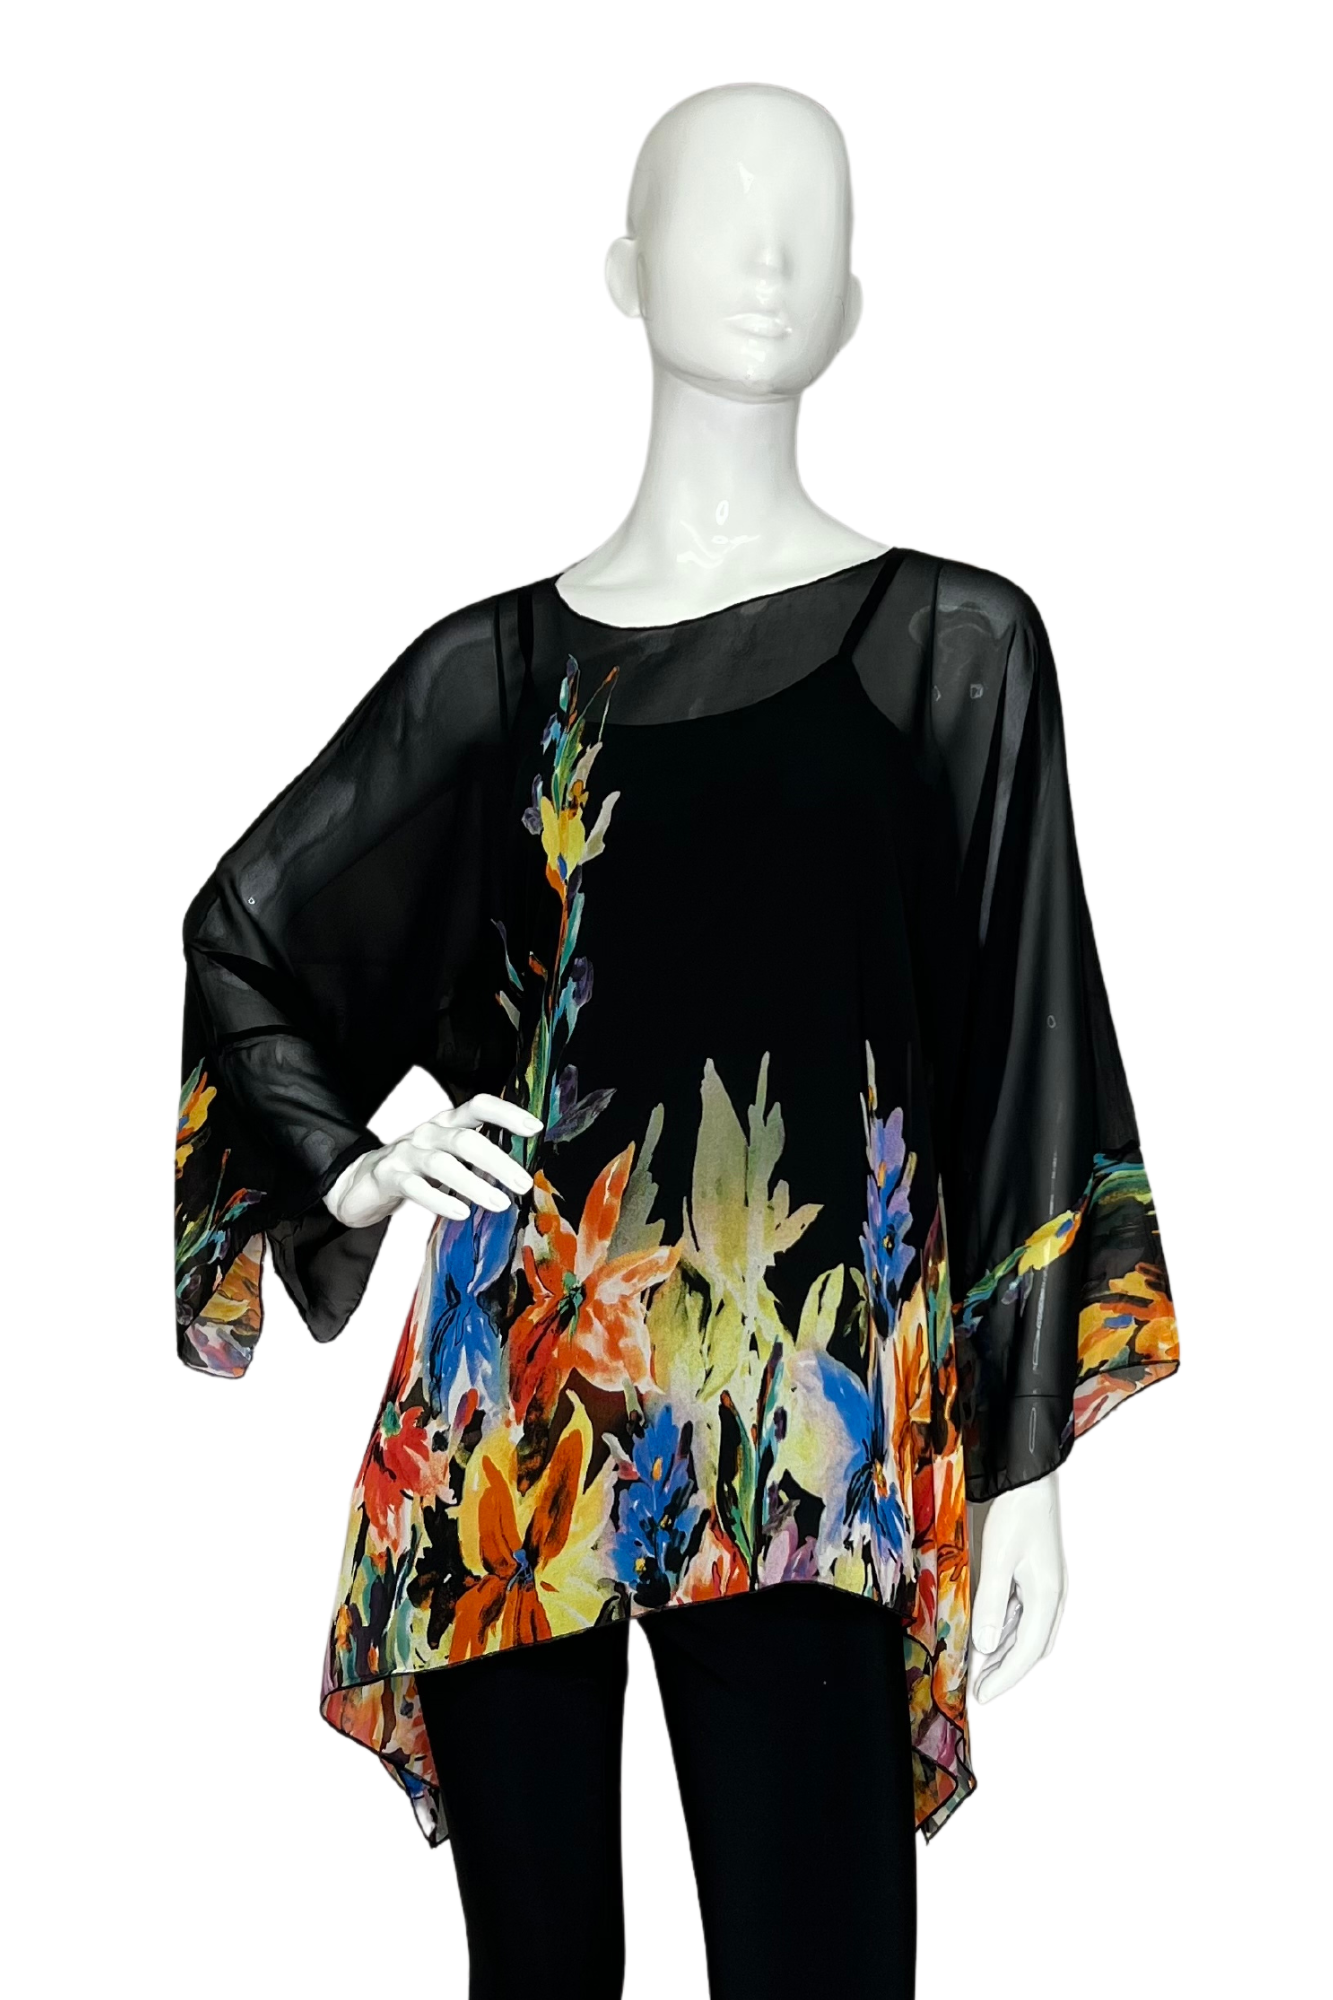 Lior One Size Fits All Black Sheer Top with flowers